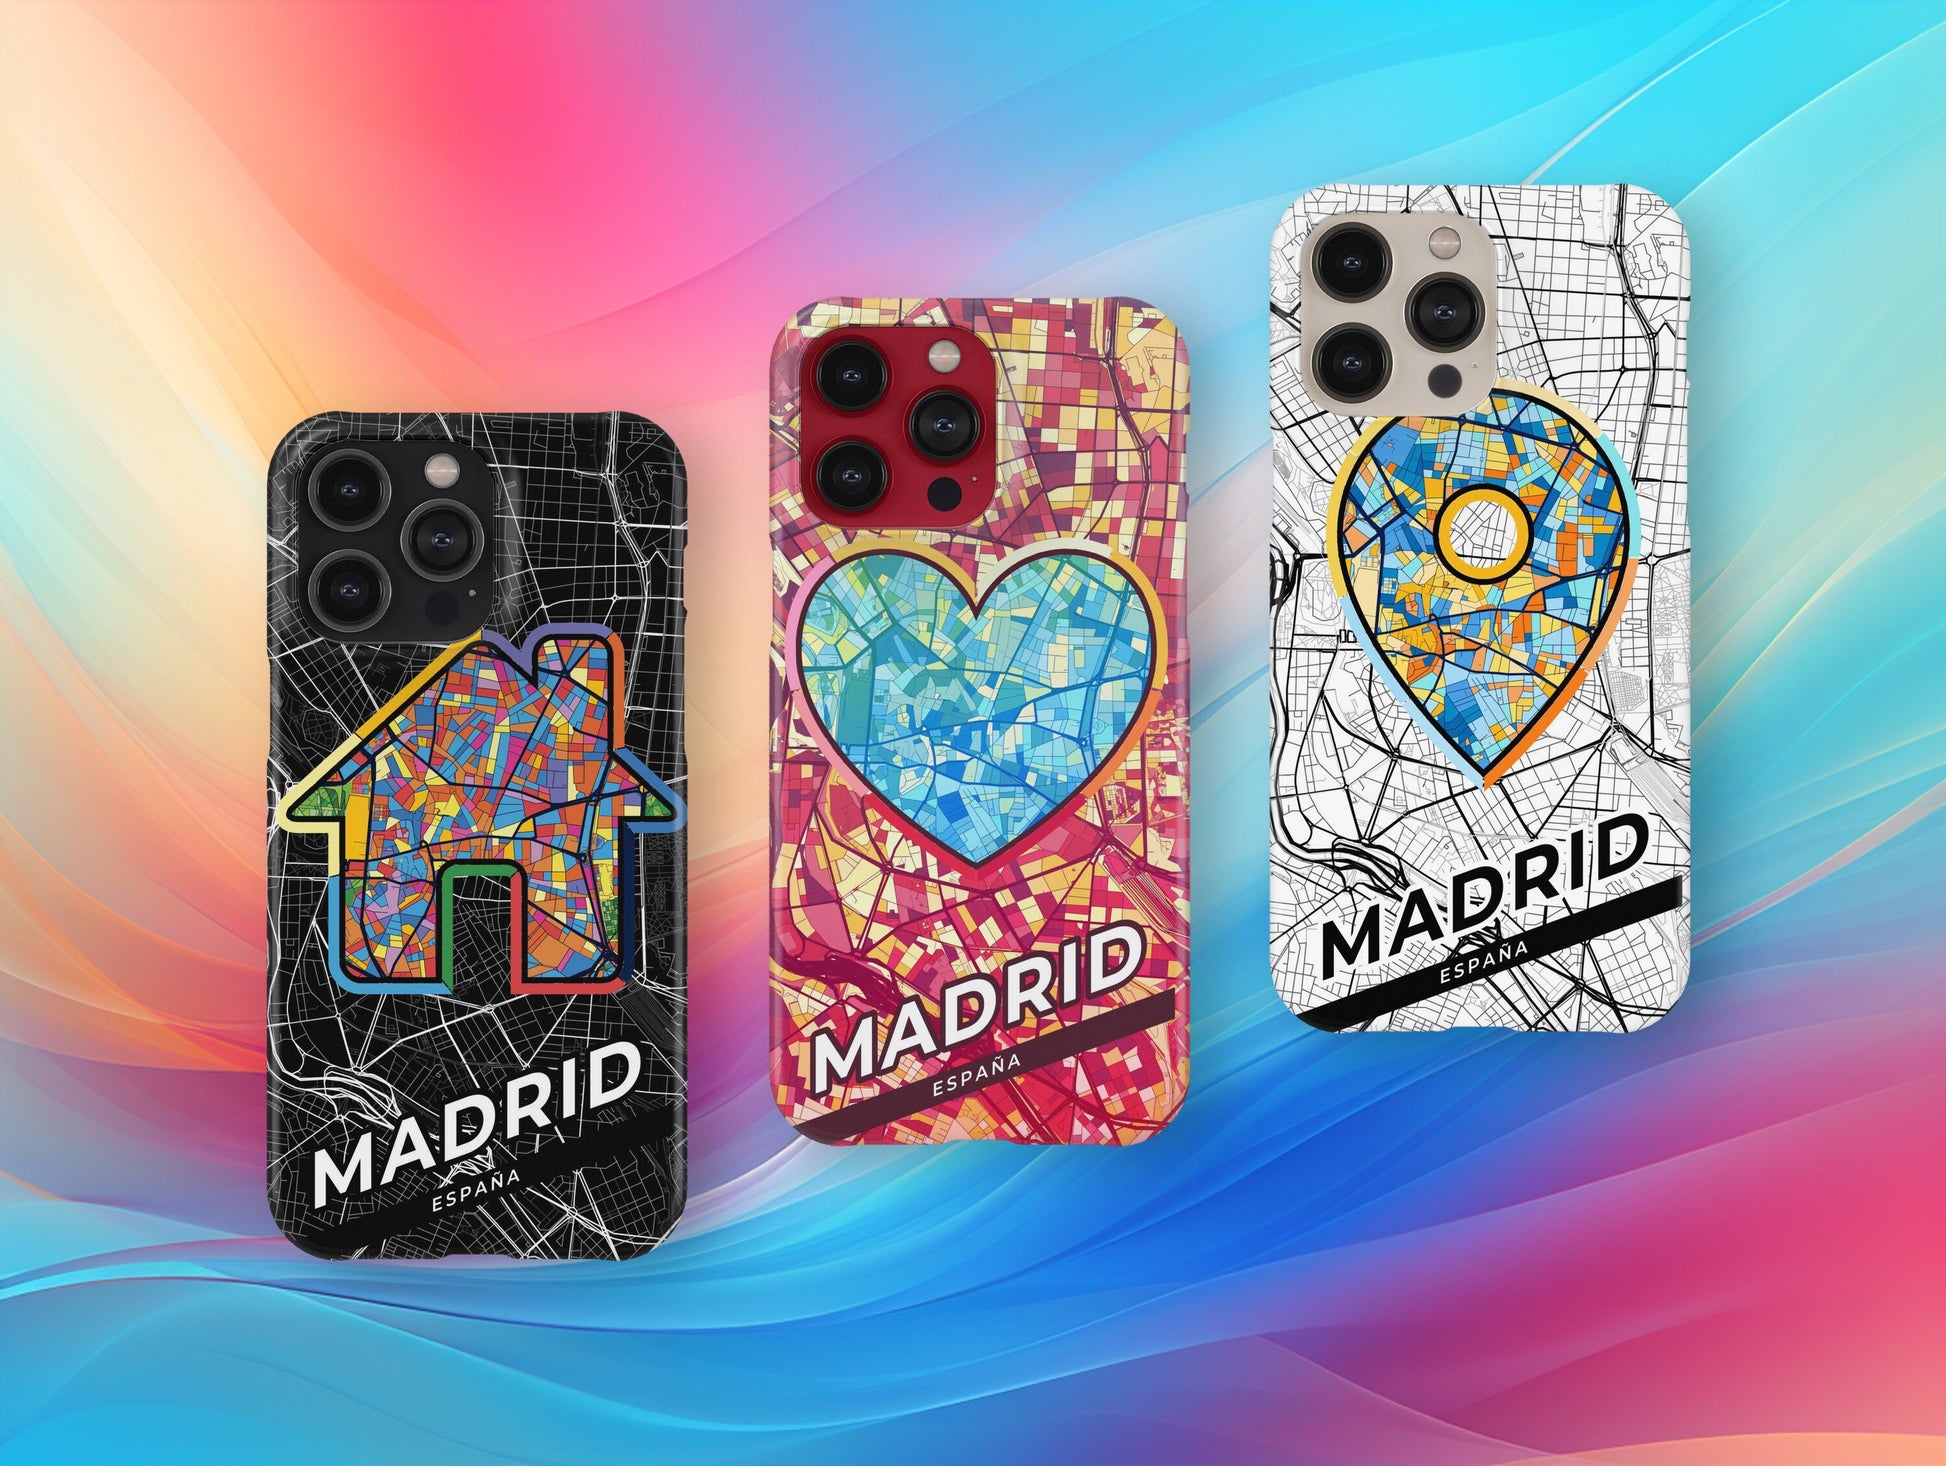 Madrid Spain slim phone case with colorful icon. Birthday, wedding or housewarming gift. Couple match cases.